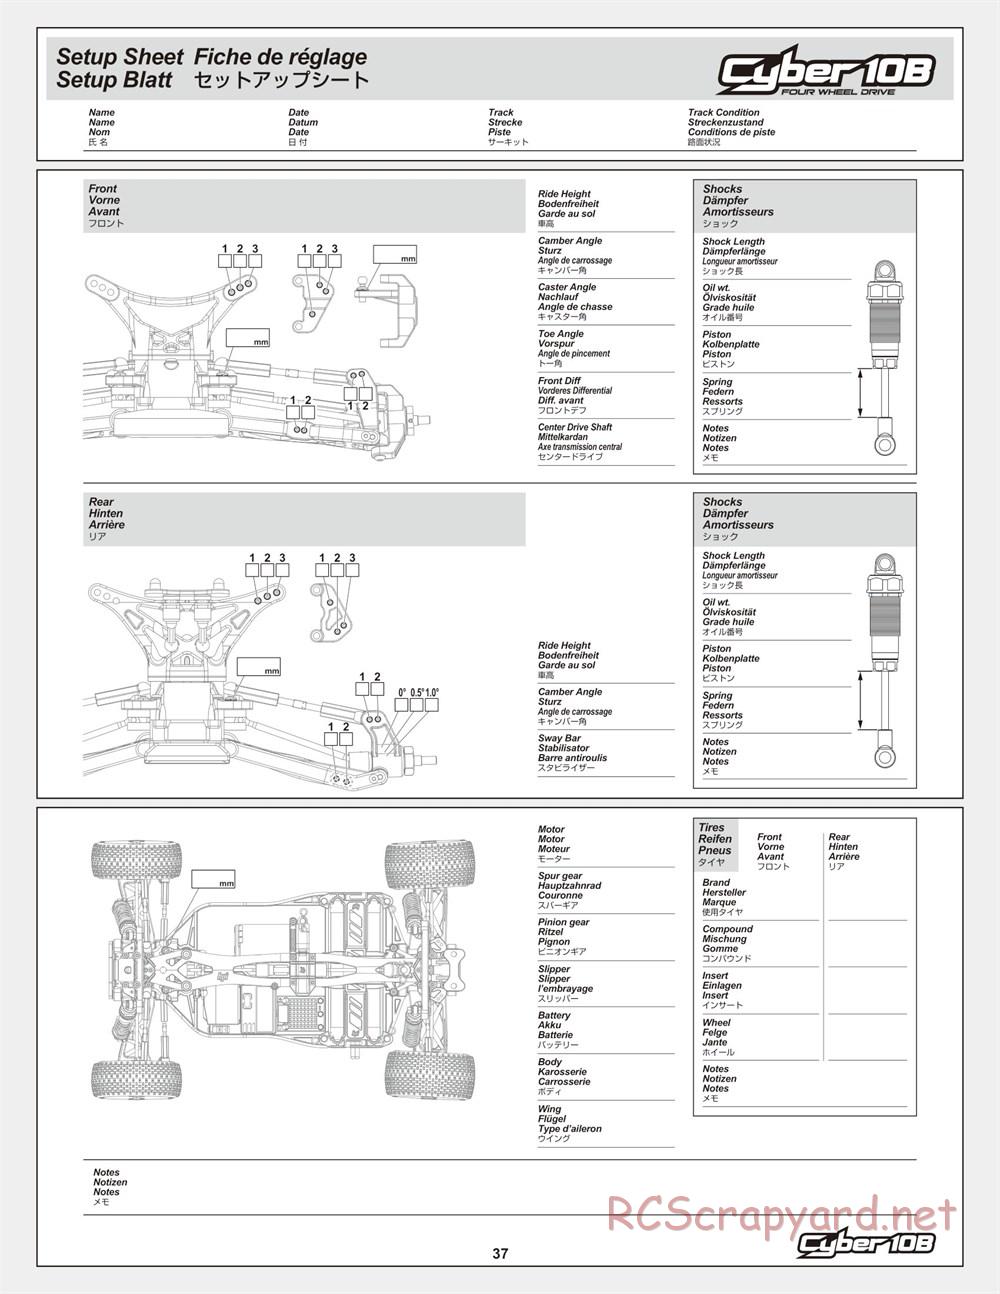 HPI - Cyber 10B - Manual - Page 37